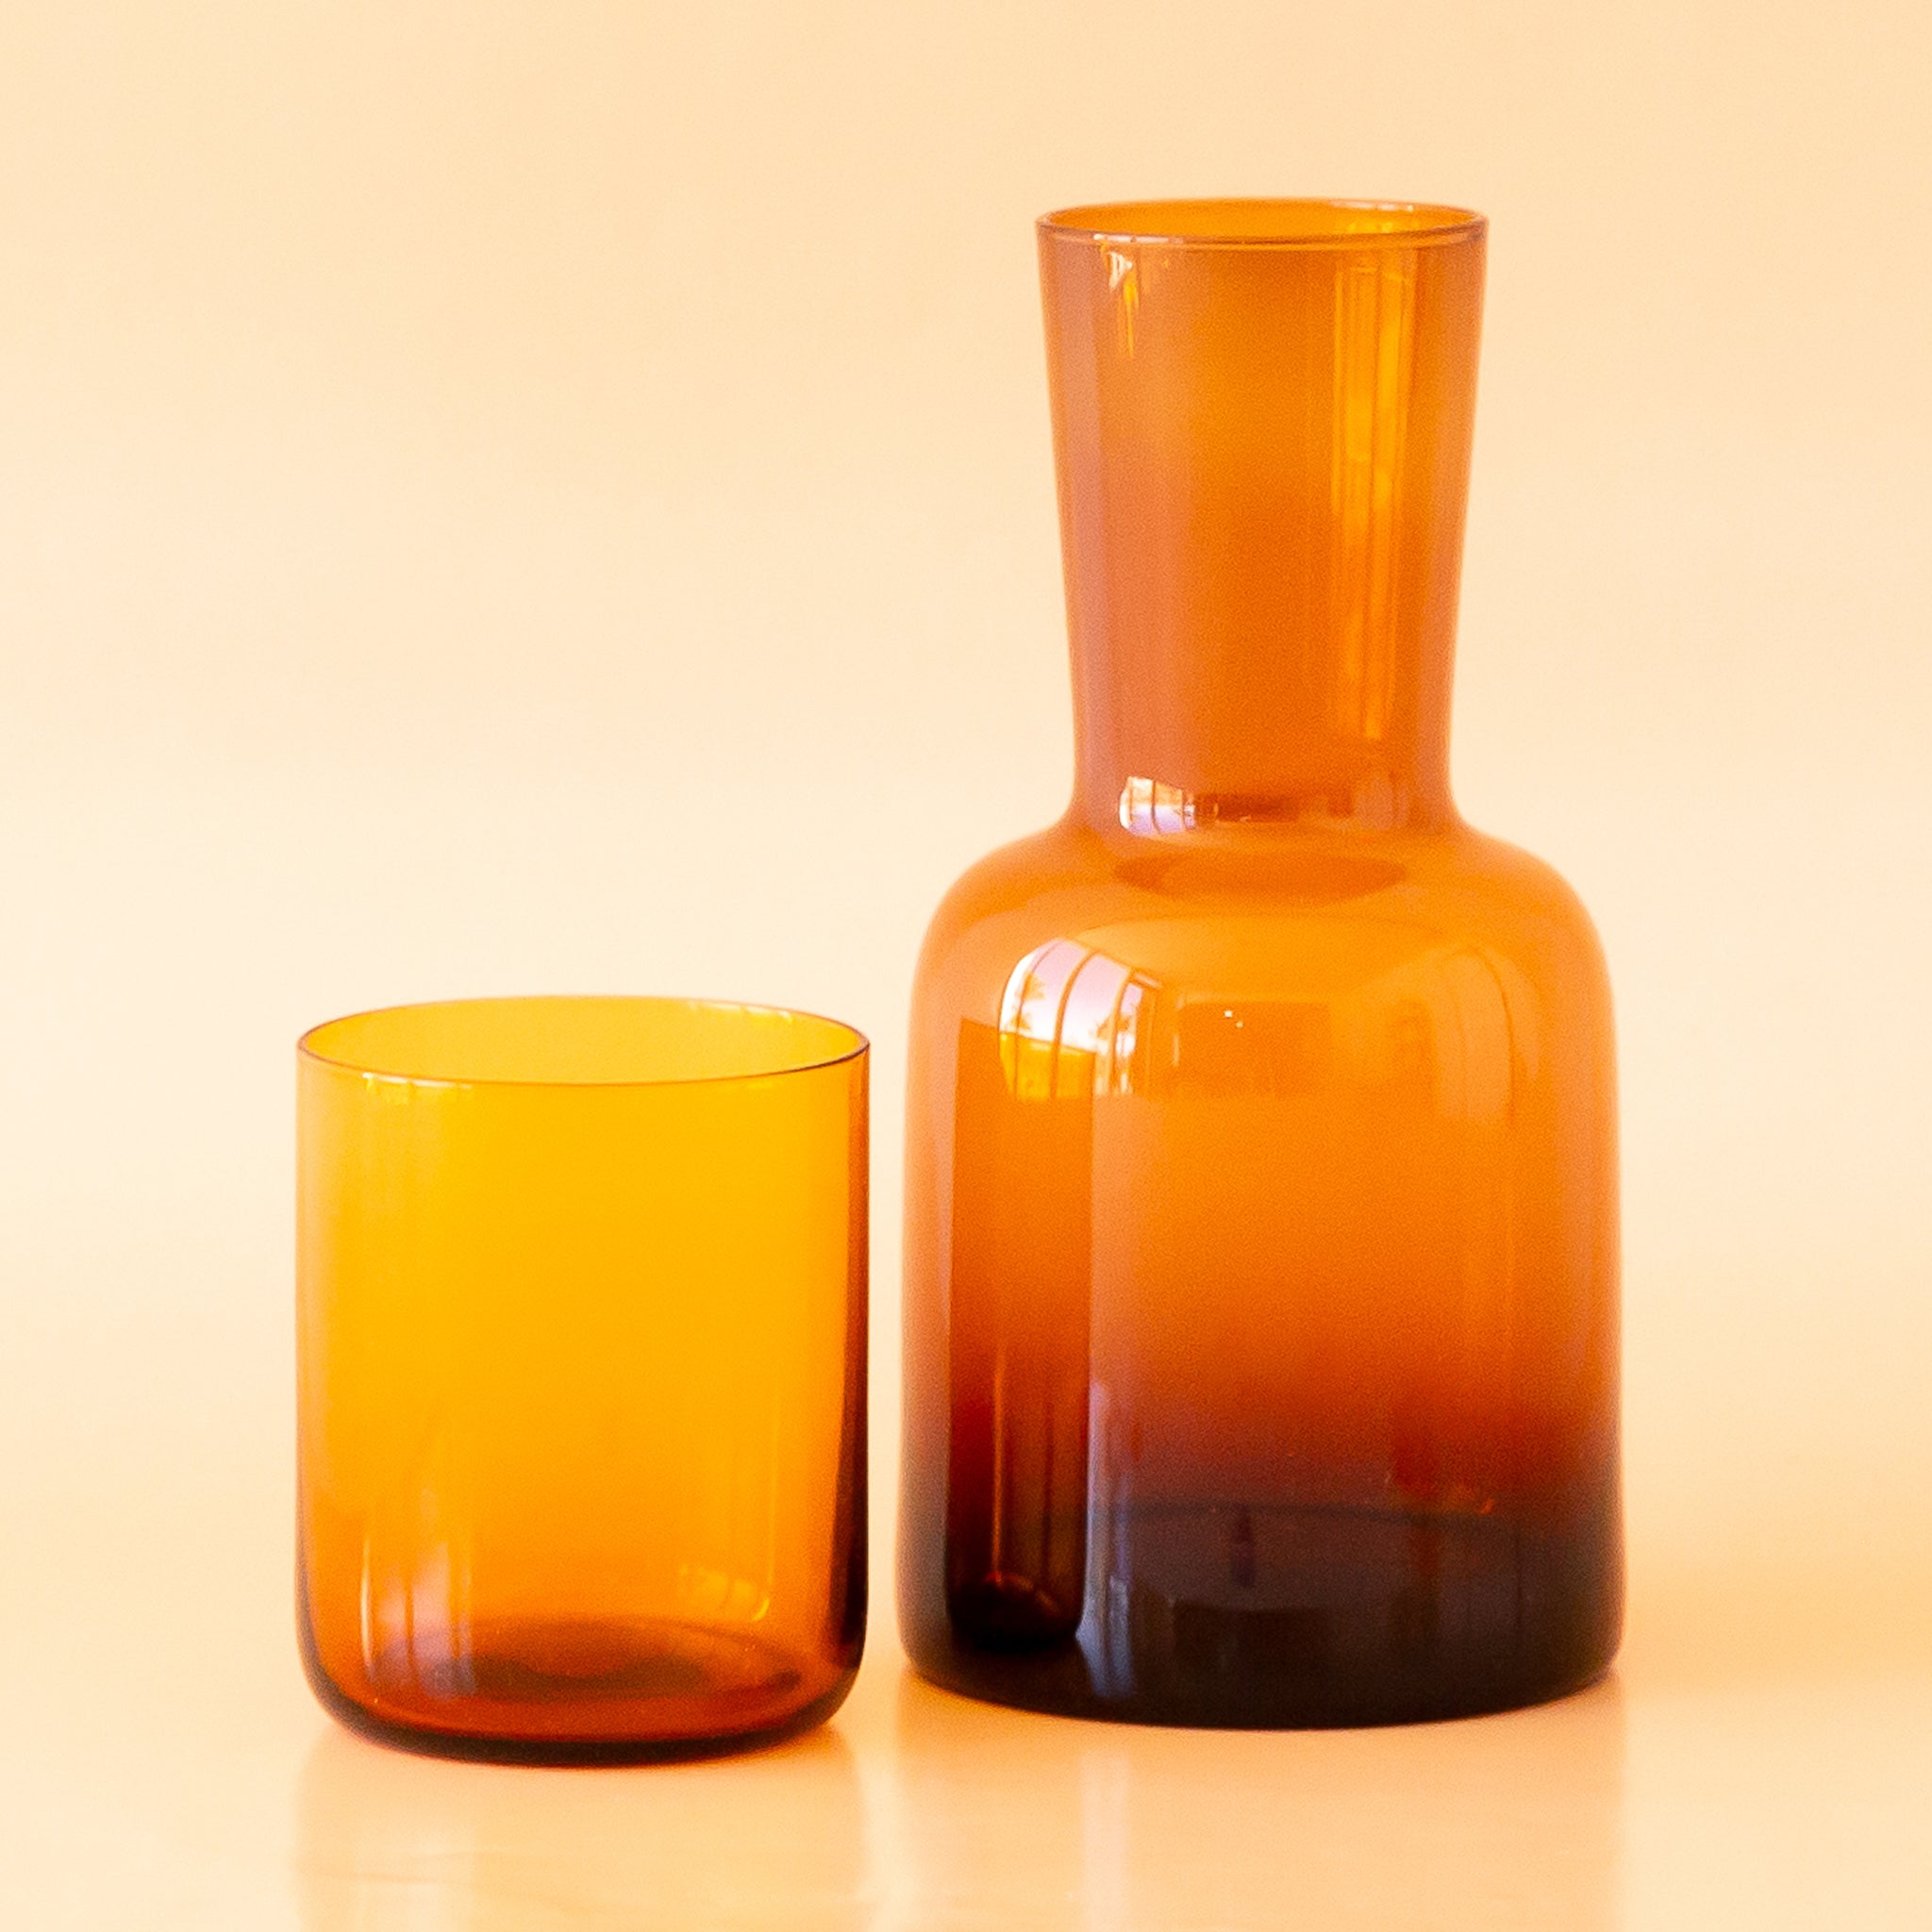 On a tan background is an amber glass carafe with a lid that doubles as a drinking glass.